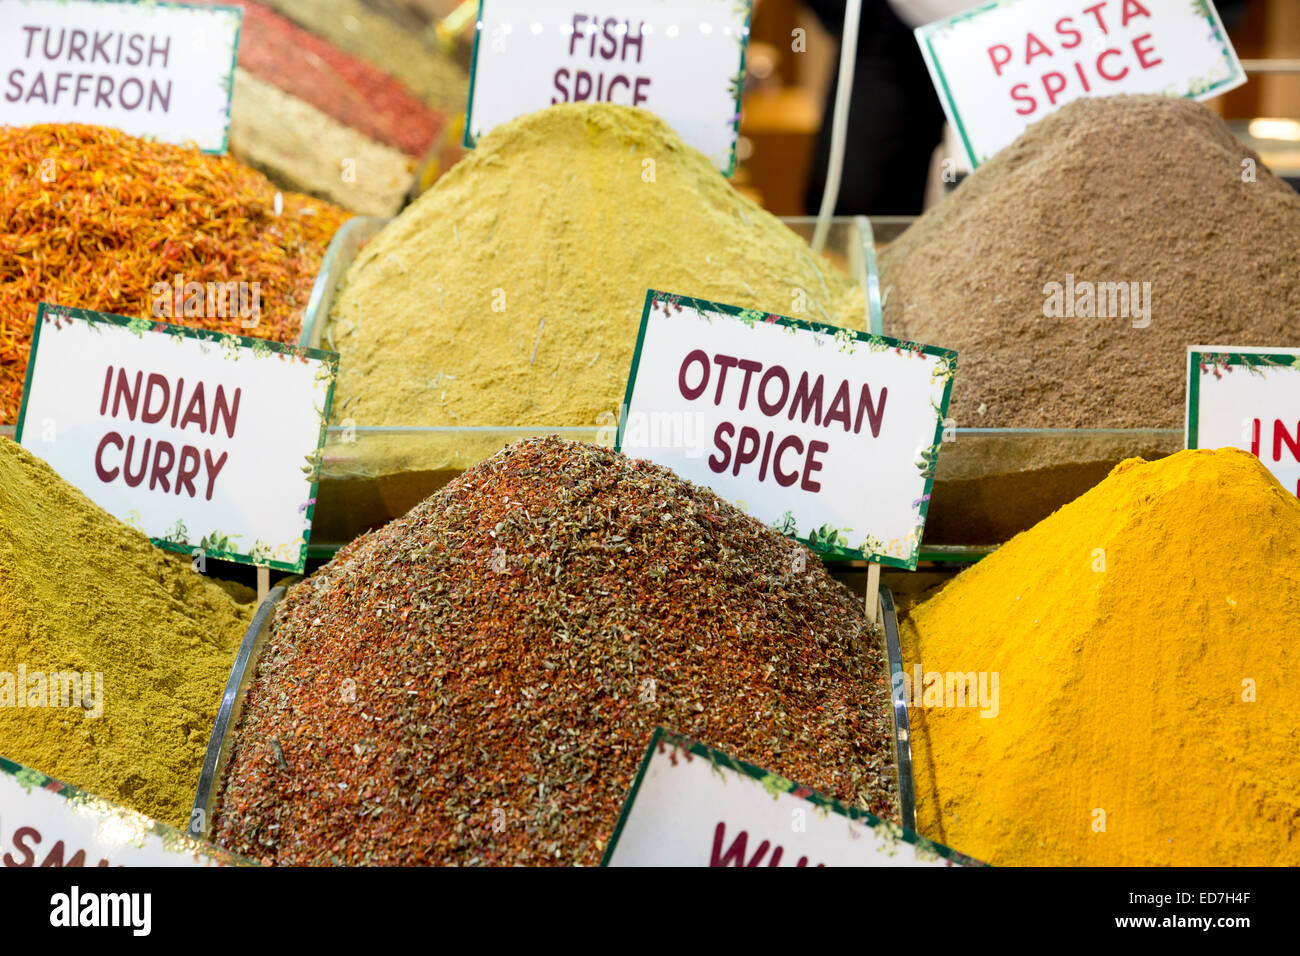 Traditional spices - saffron, curry, Ottoman, in Misir Carsisi Egyptian Bazaar food and spice market, Istanbul, Turkey Stock Photo